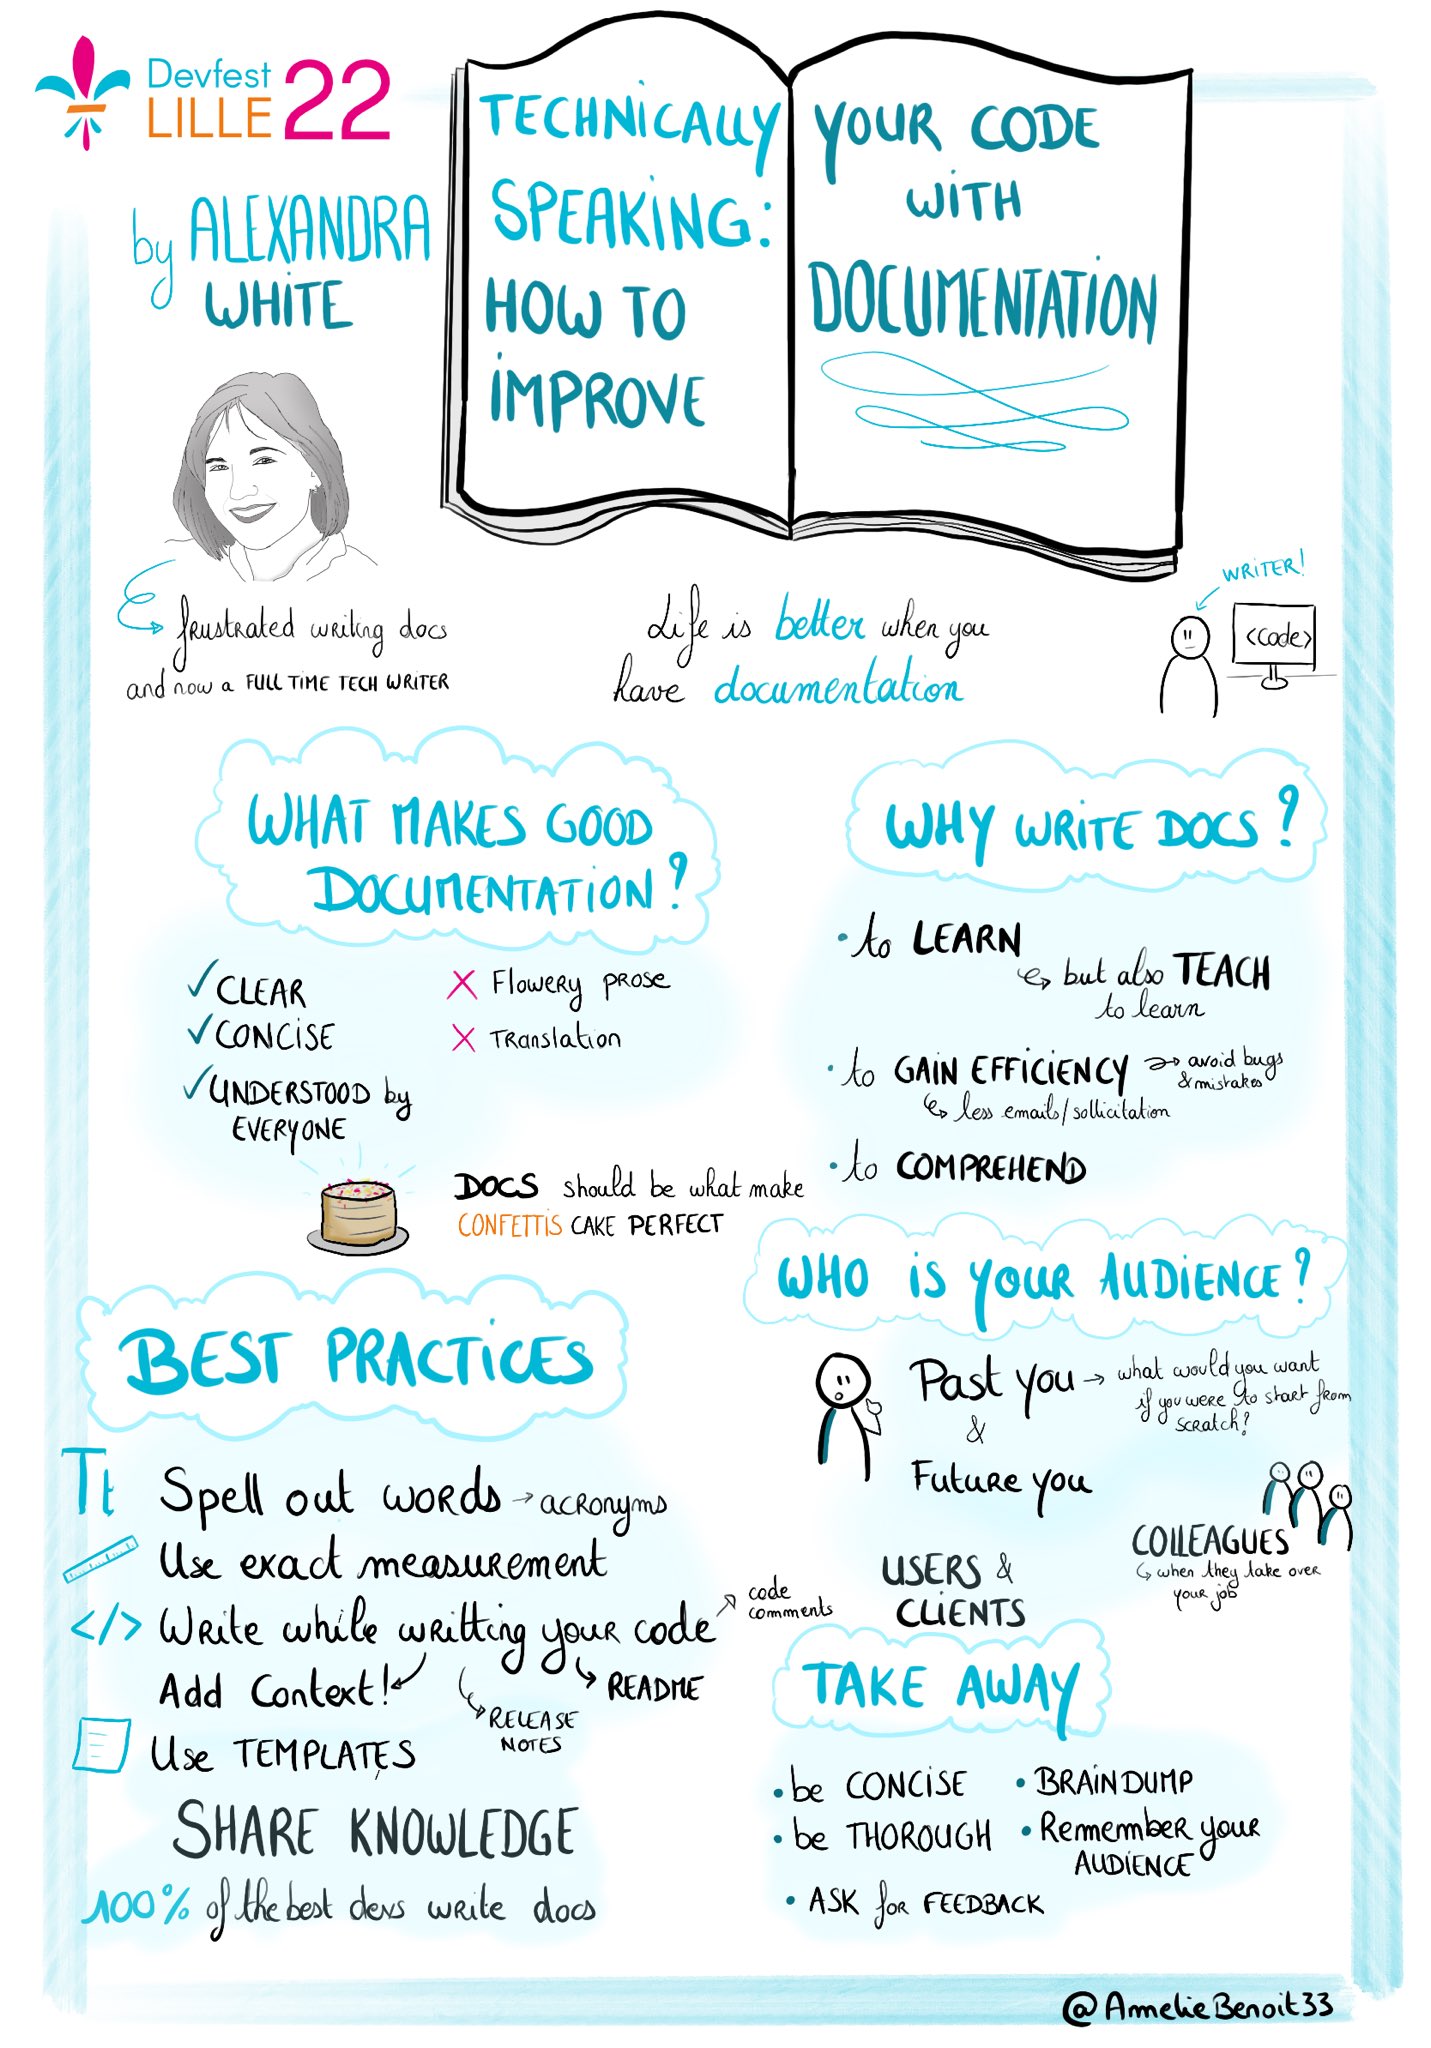 Conference Sketchnote of Alexandre White "Technically speaking: how to improve your documentation"